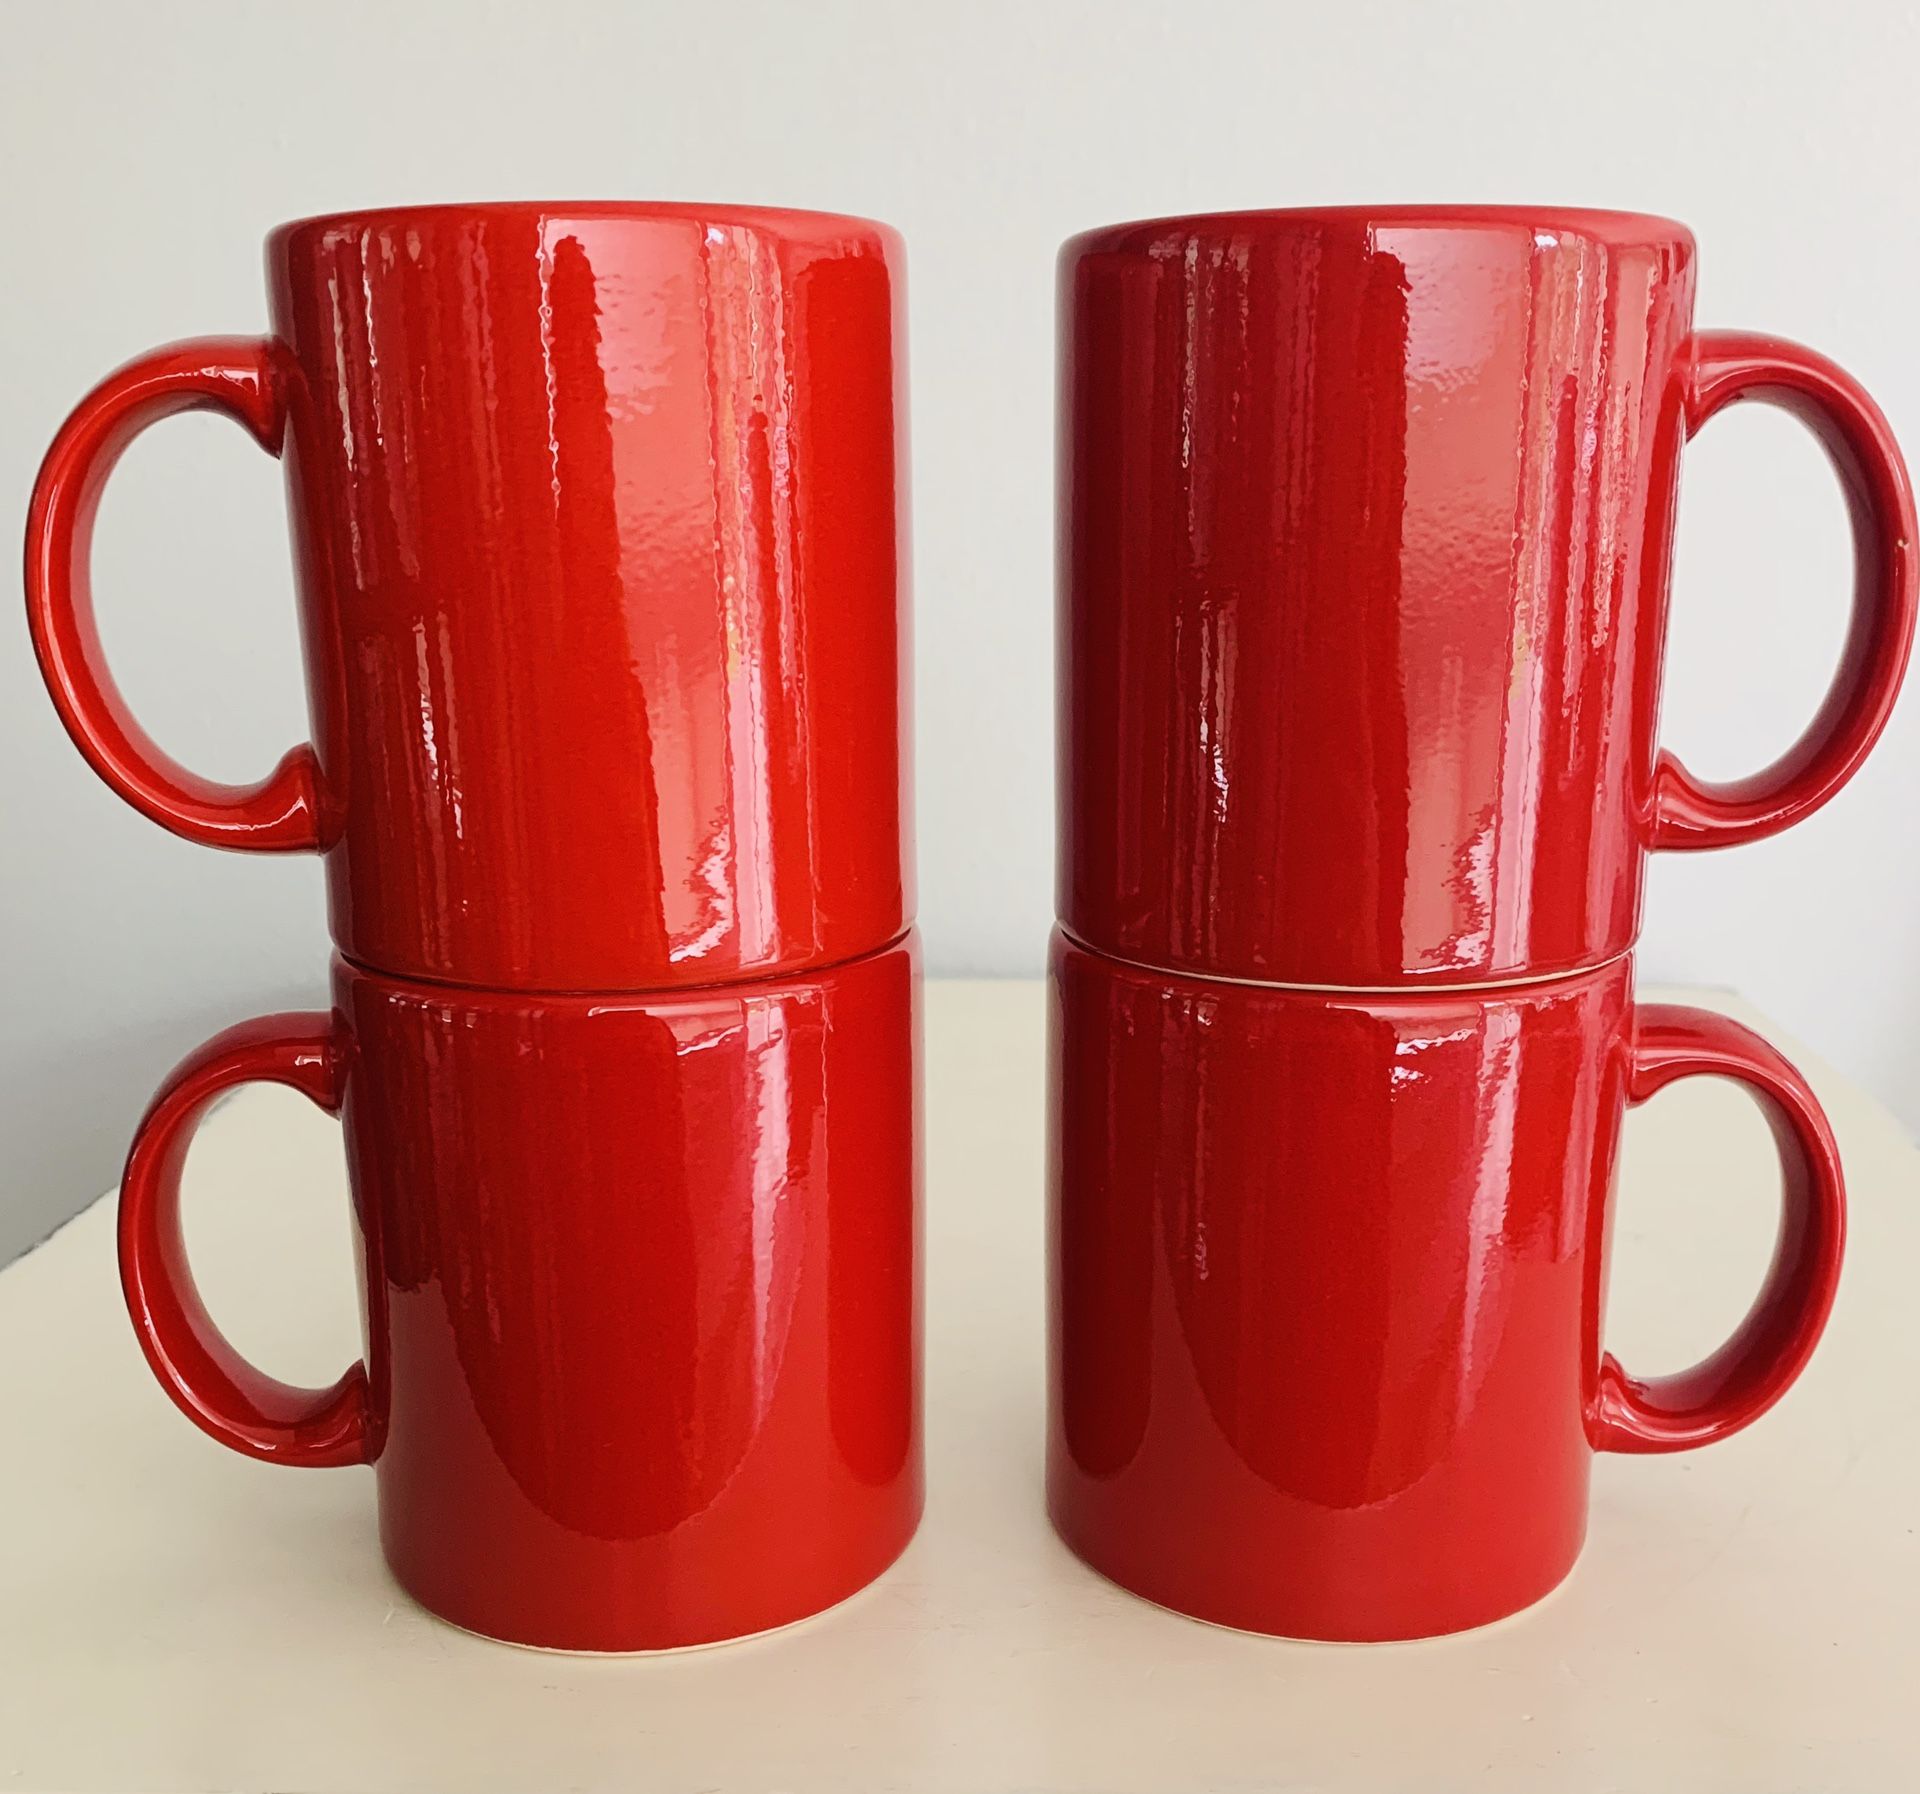 Vintage Waechtersbach Germany Ceramic set of 4 bright red 13 ounce mugs. 3 3/4” tall Beautiful condition with no chips cracks or damage.